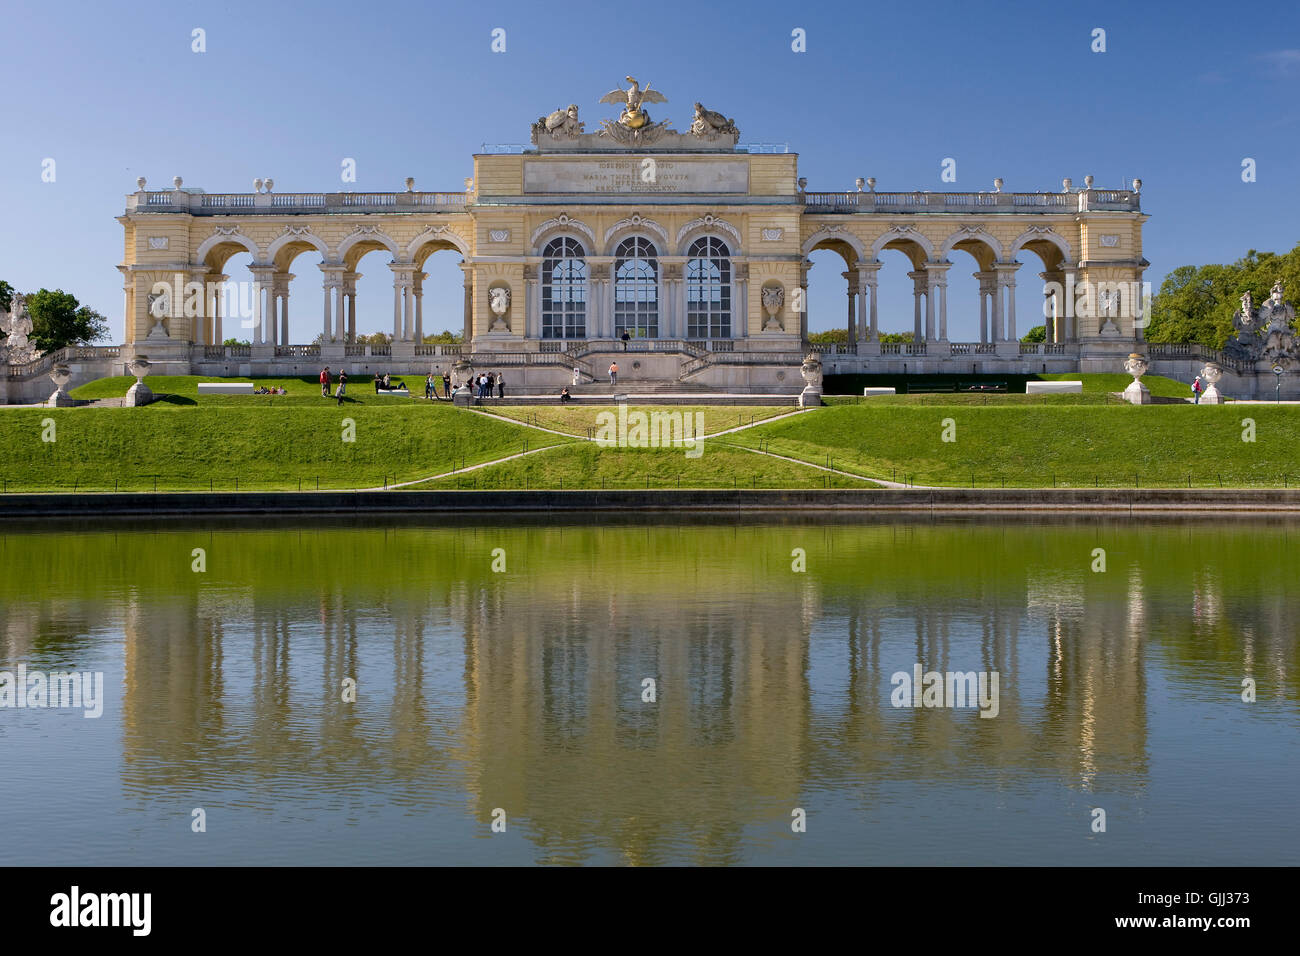 vienna protection of historic buildings and monuments monument Stock Photo